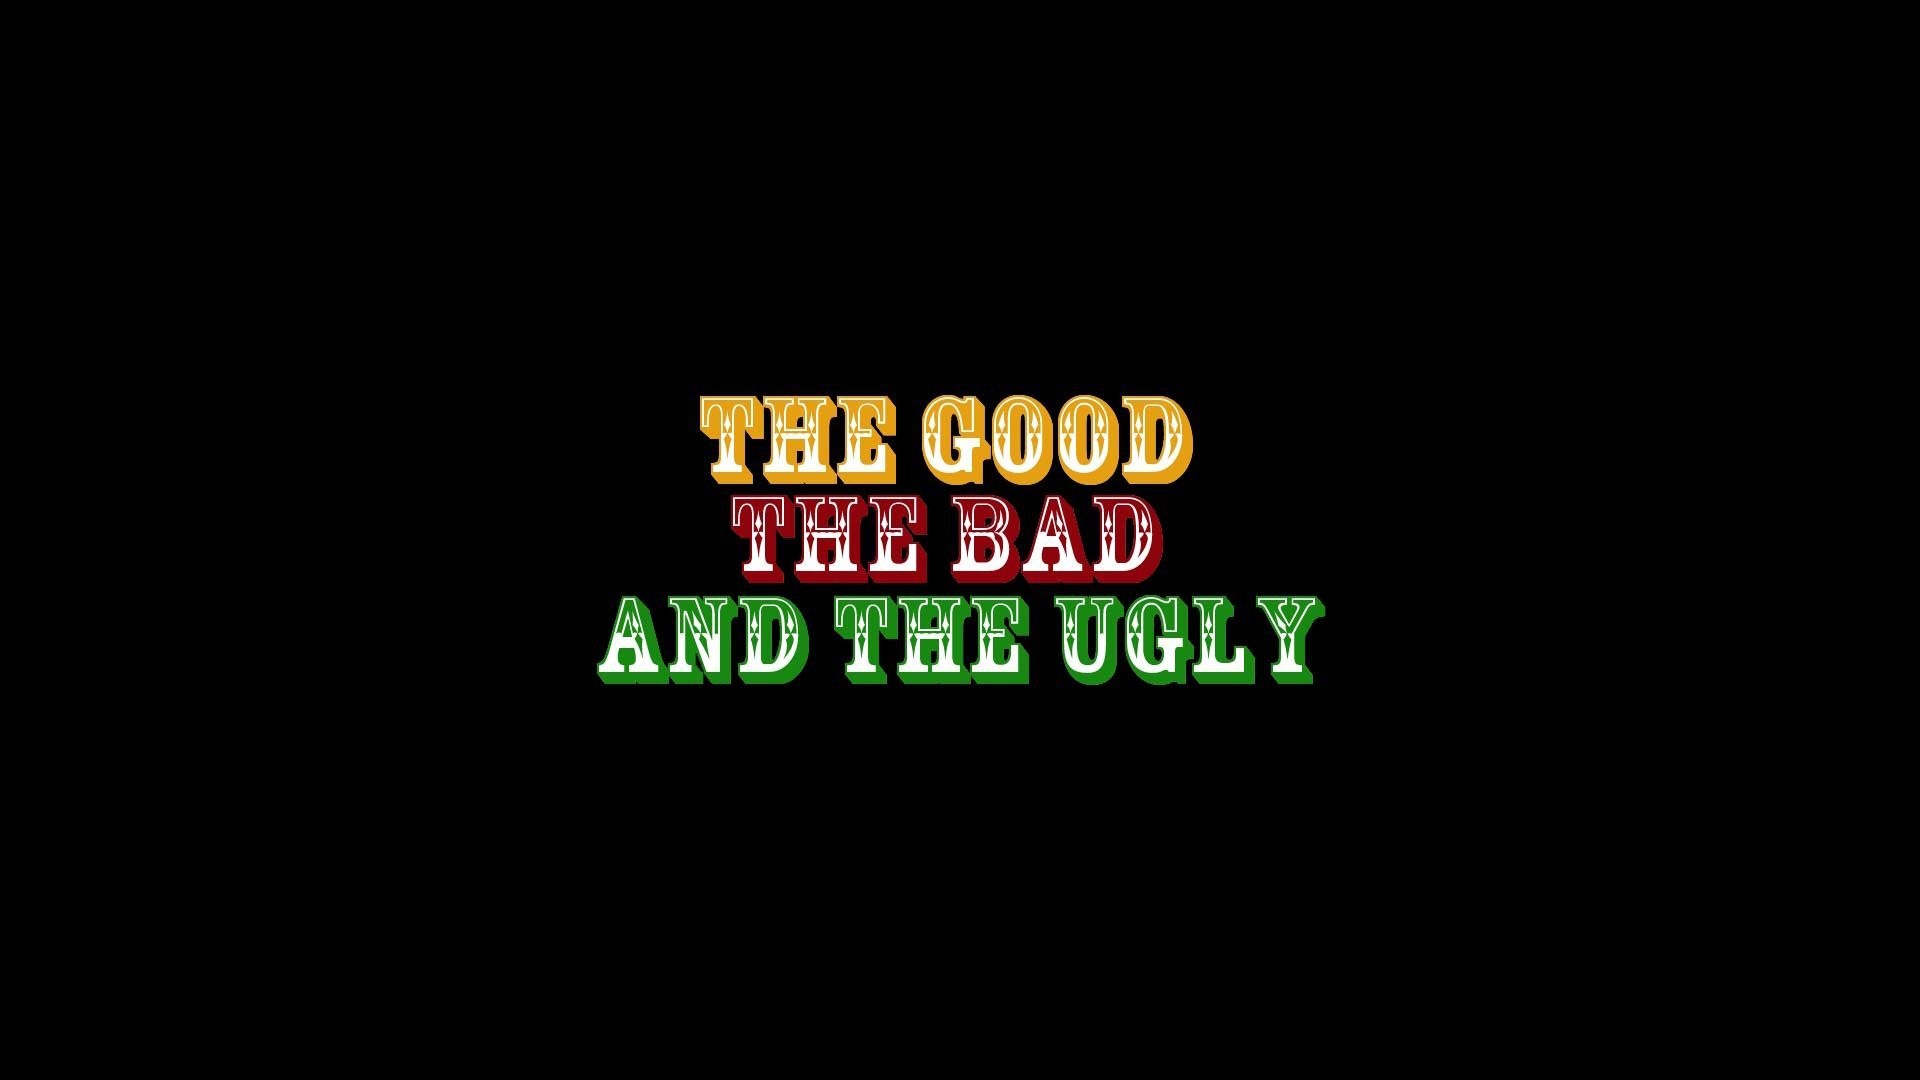 1920x1080 nice bad evil the good the bad and the ugly film main as clint eastwood lee